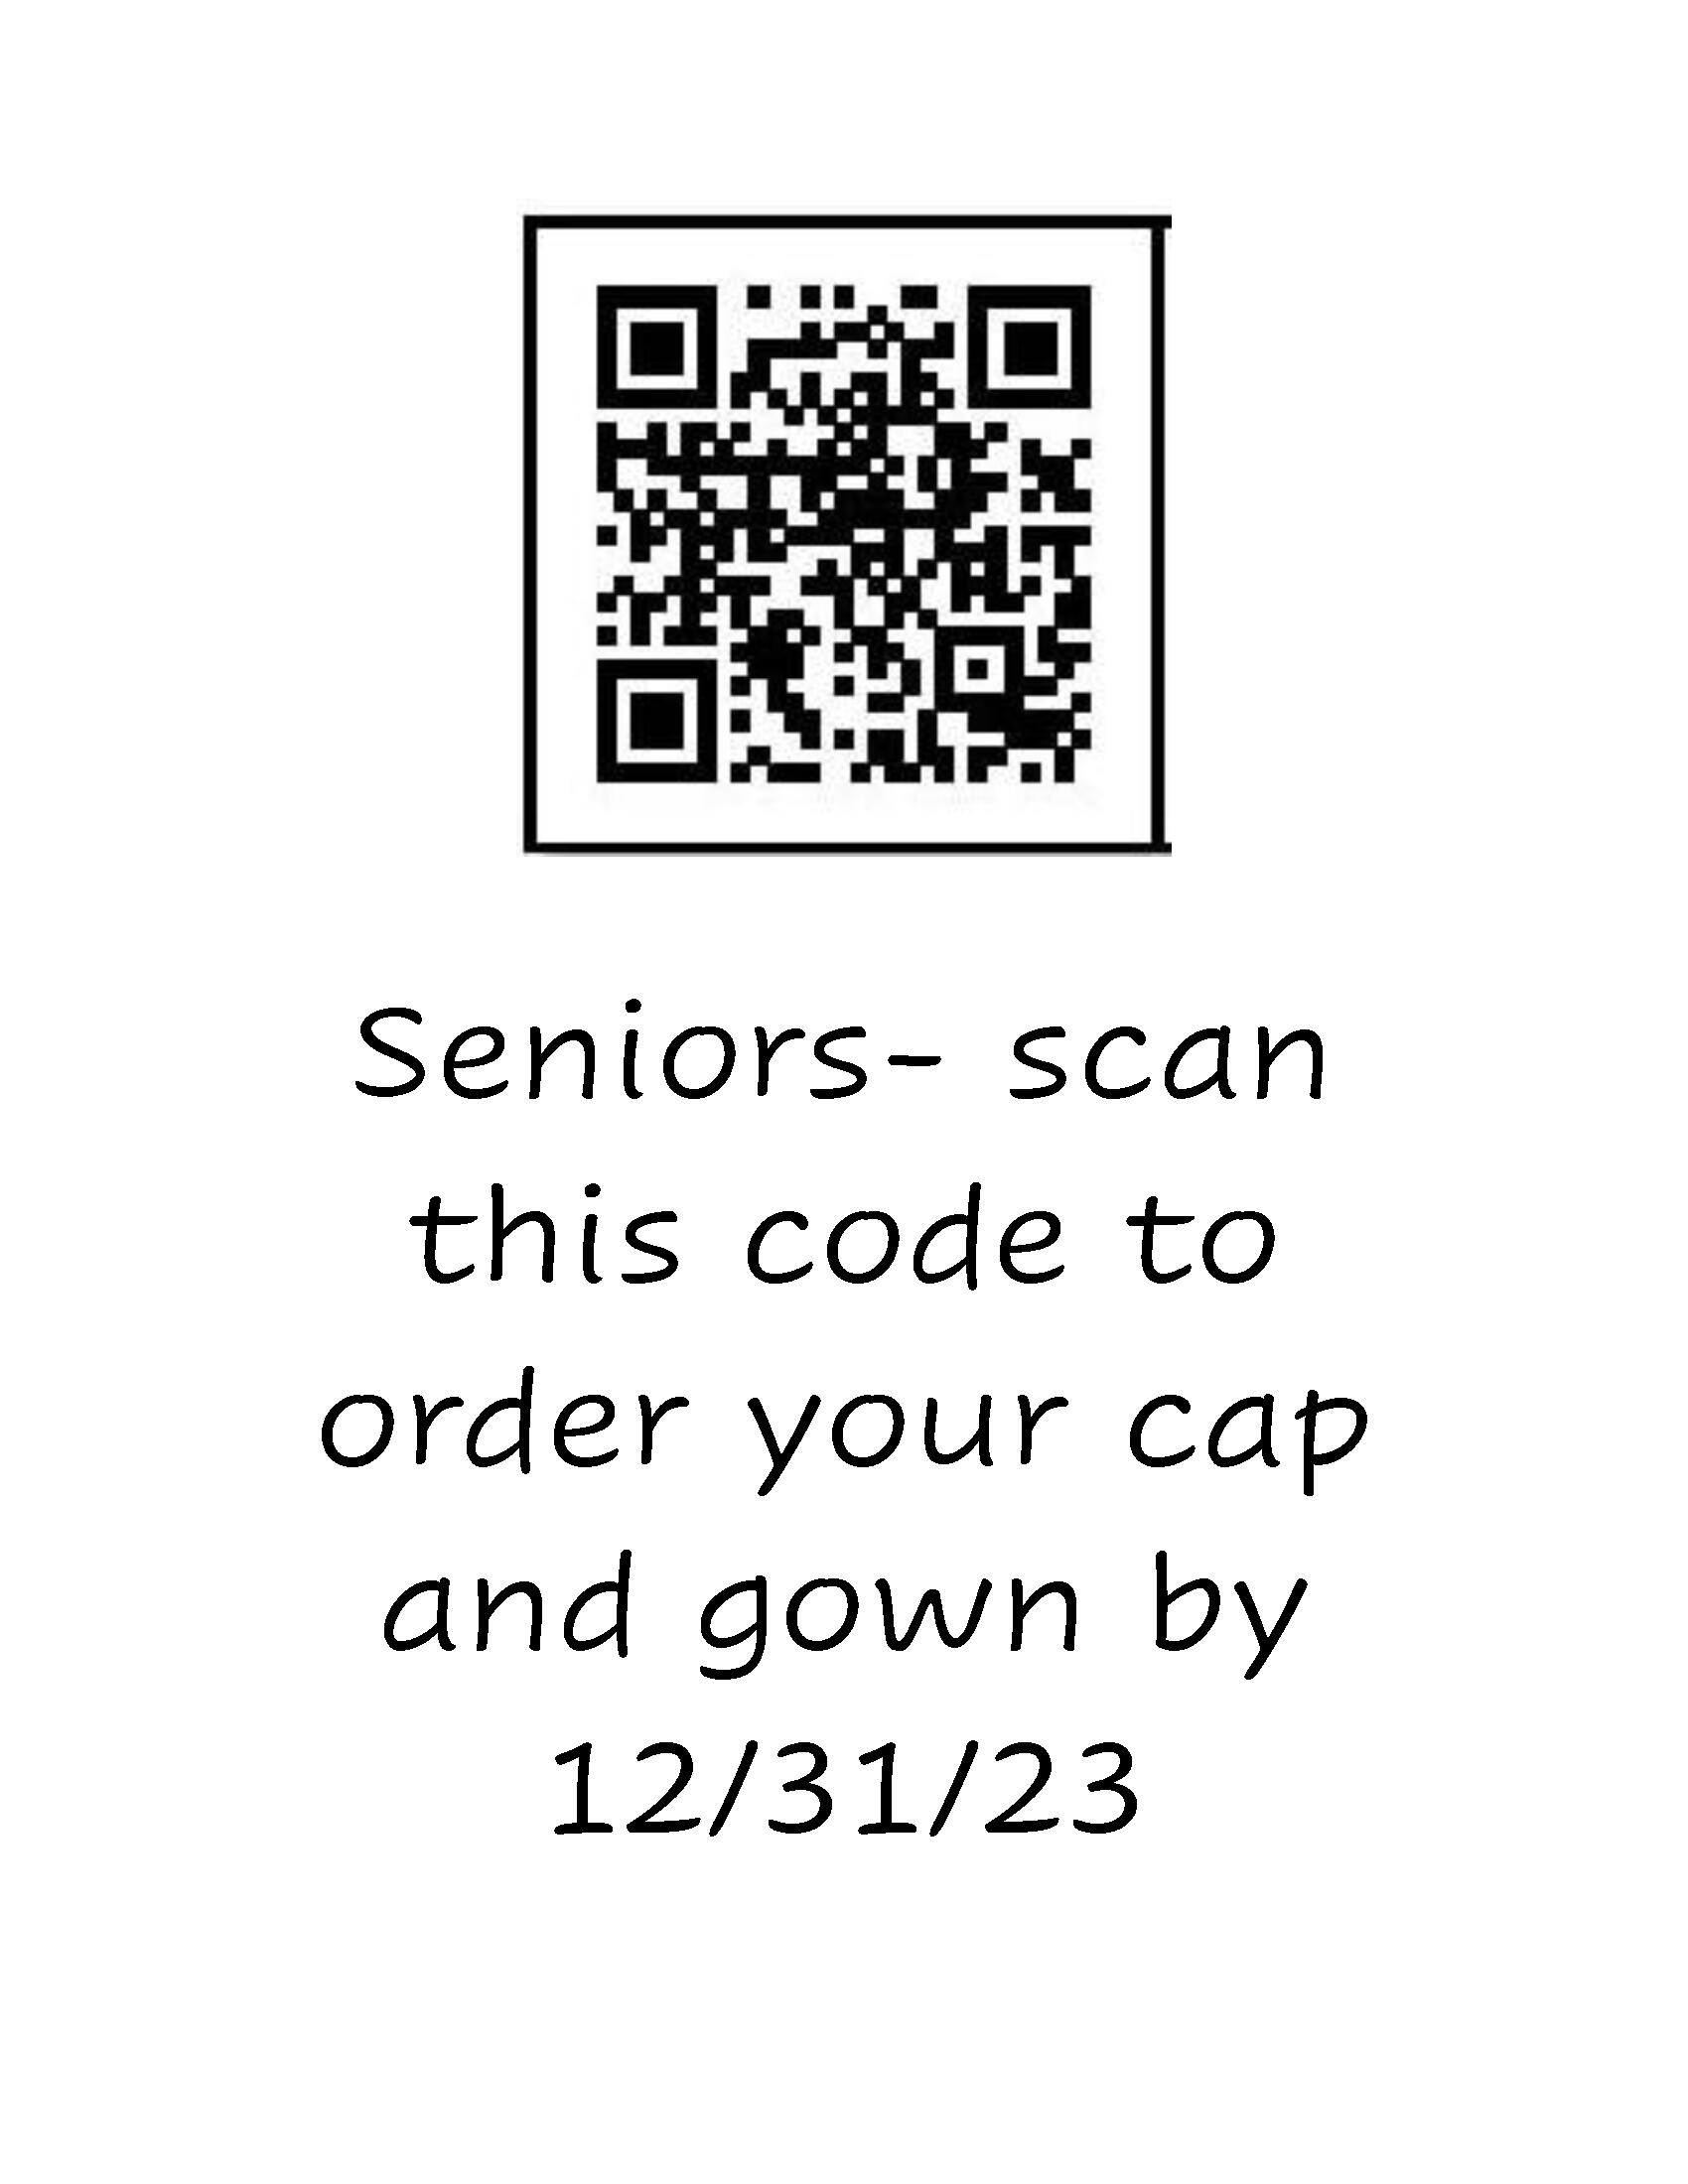 QR code for cap and gown order